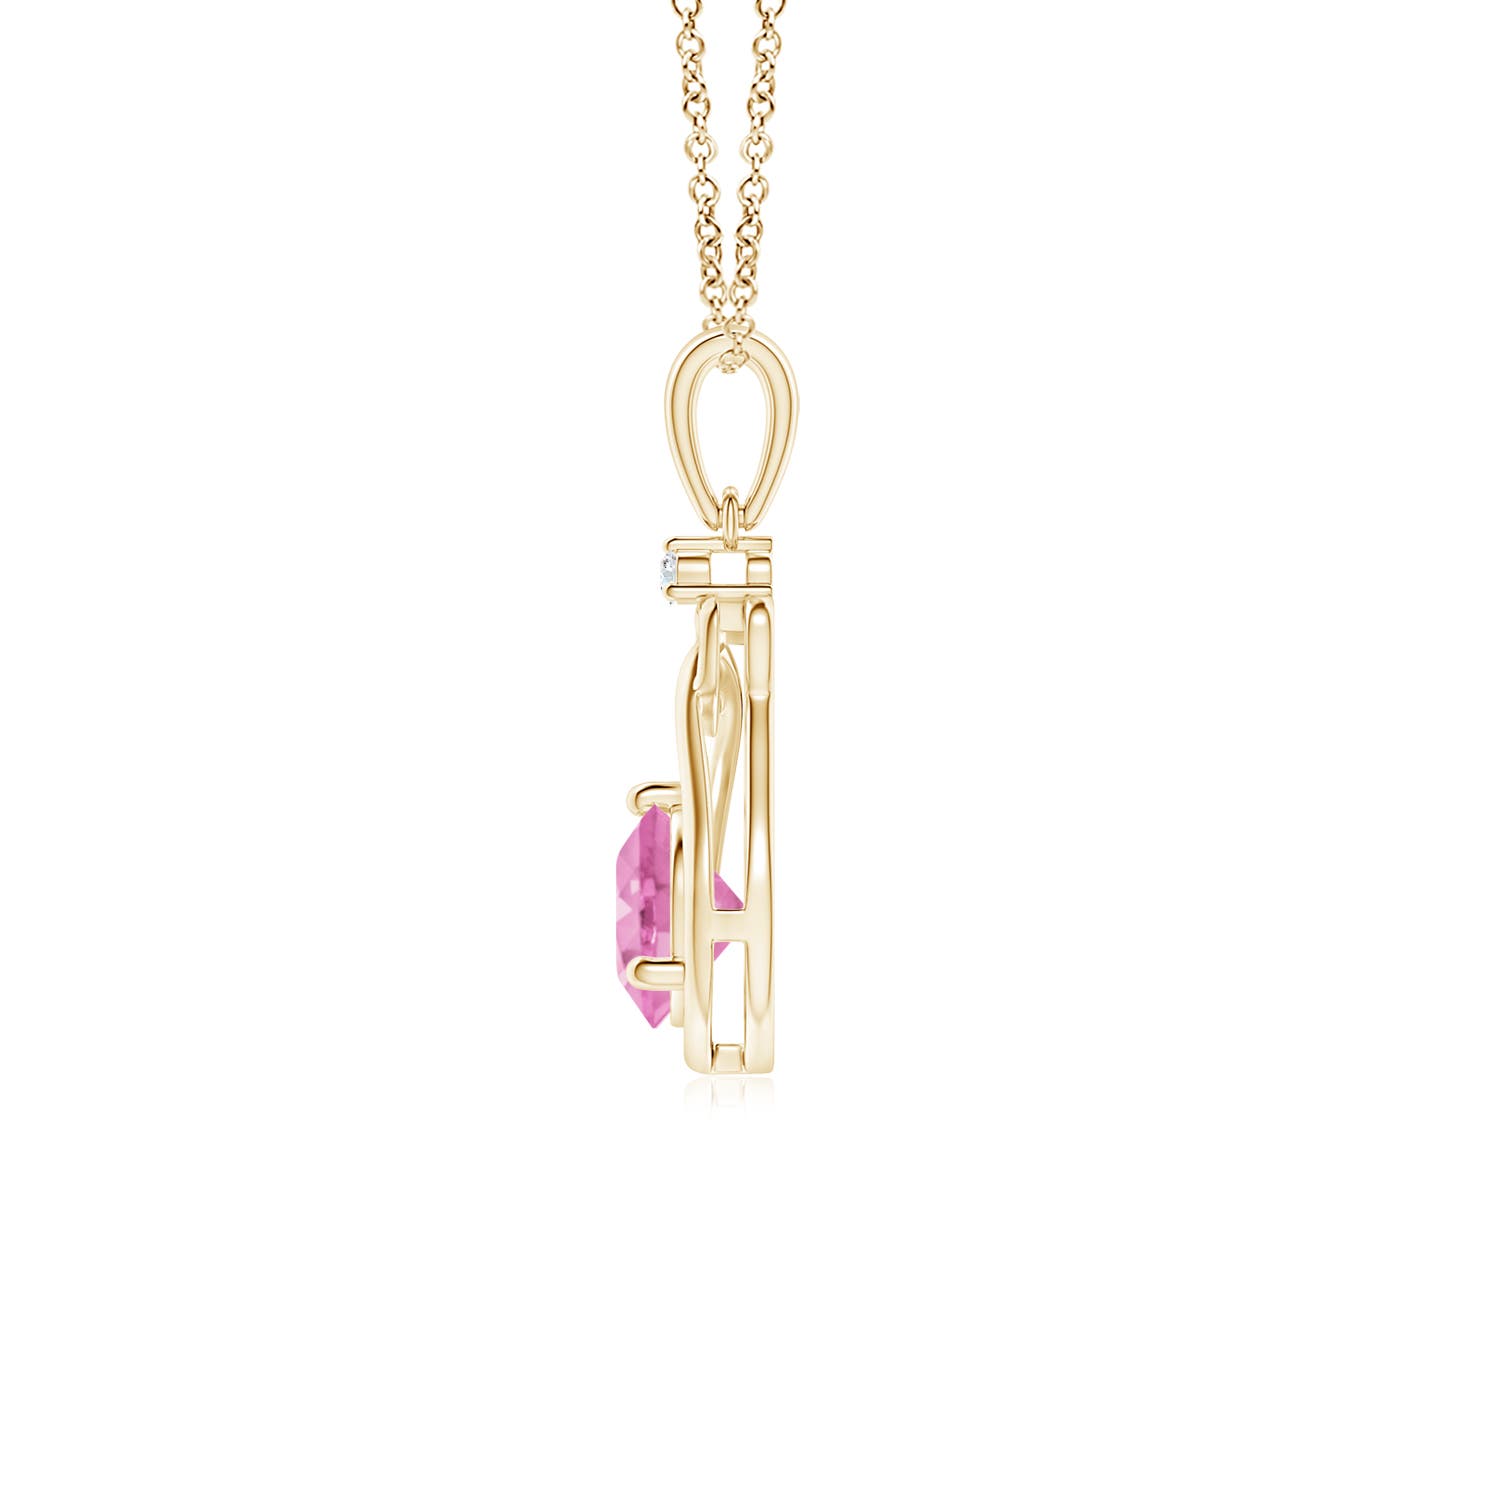 A - Pink Sapphire / 0.61 CT / 14 KT Yellow Gold